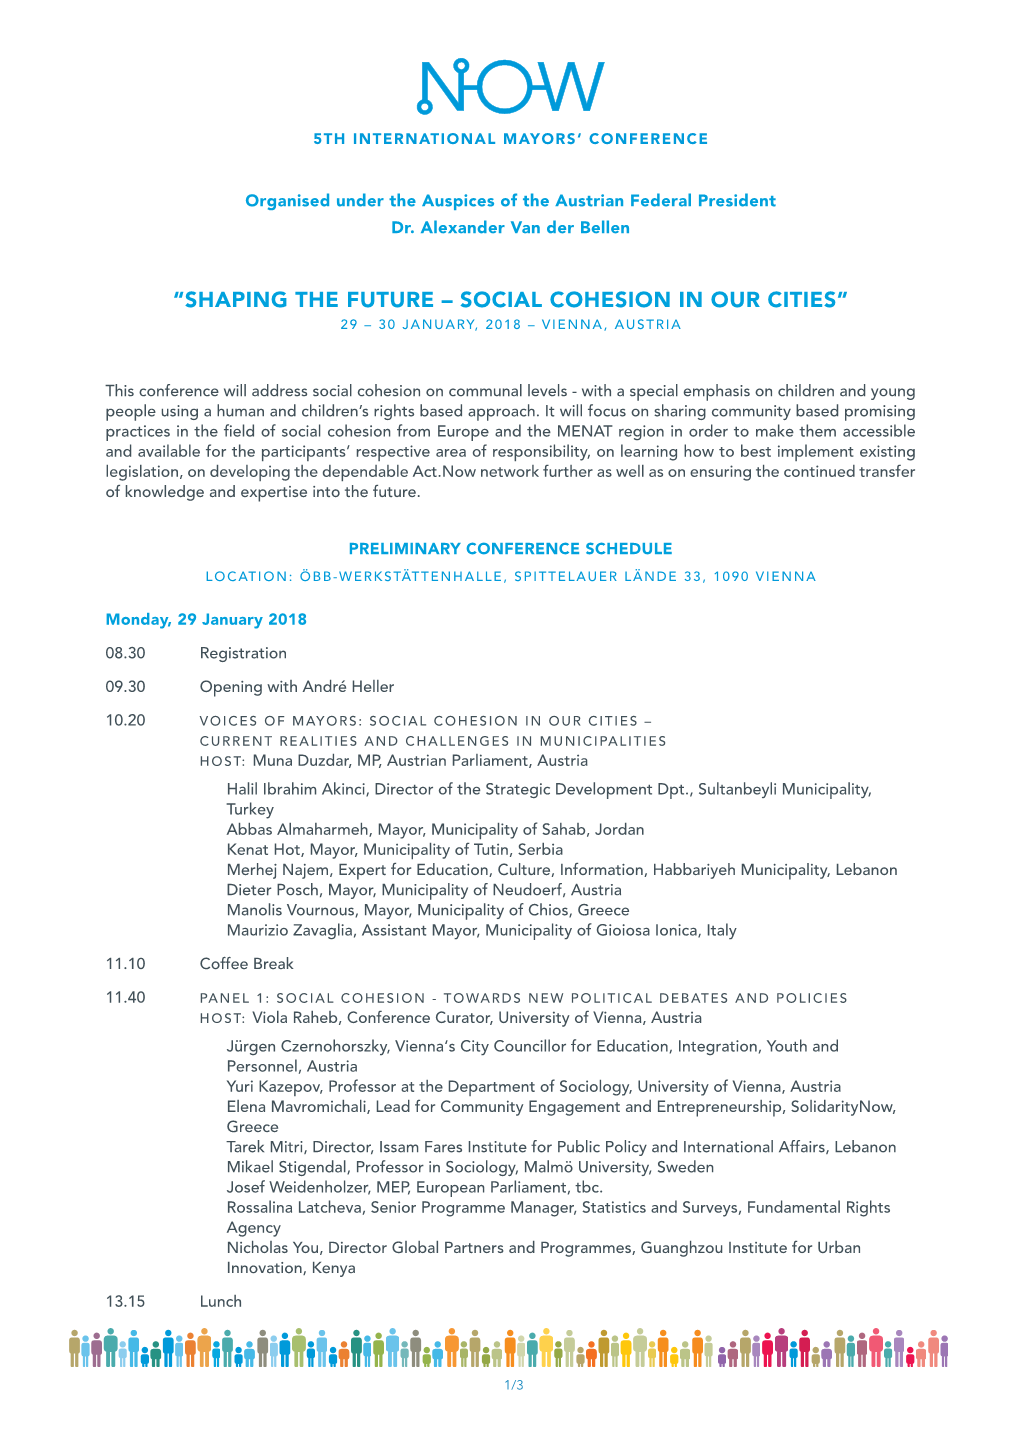 “Shaping the Future – Social Cohesion in Our Cities” 29 – 30 January, 2018 – Vienna, Austria